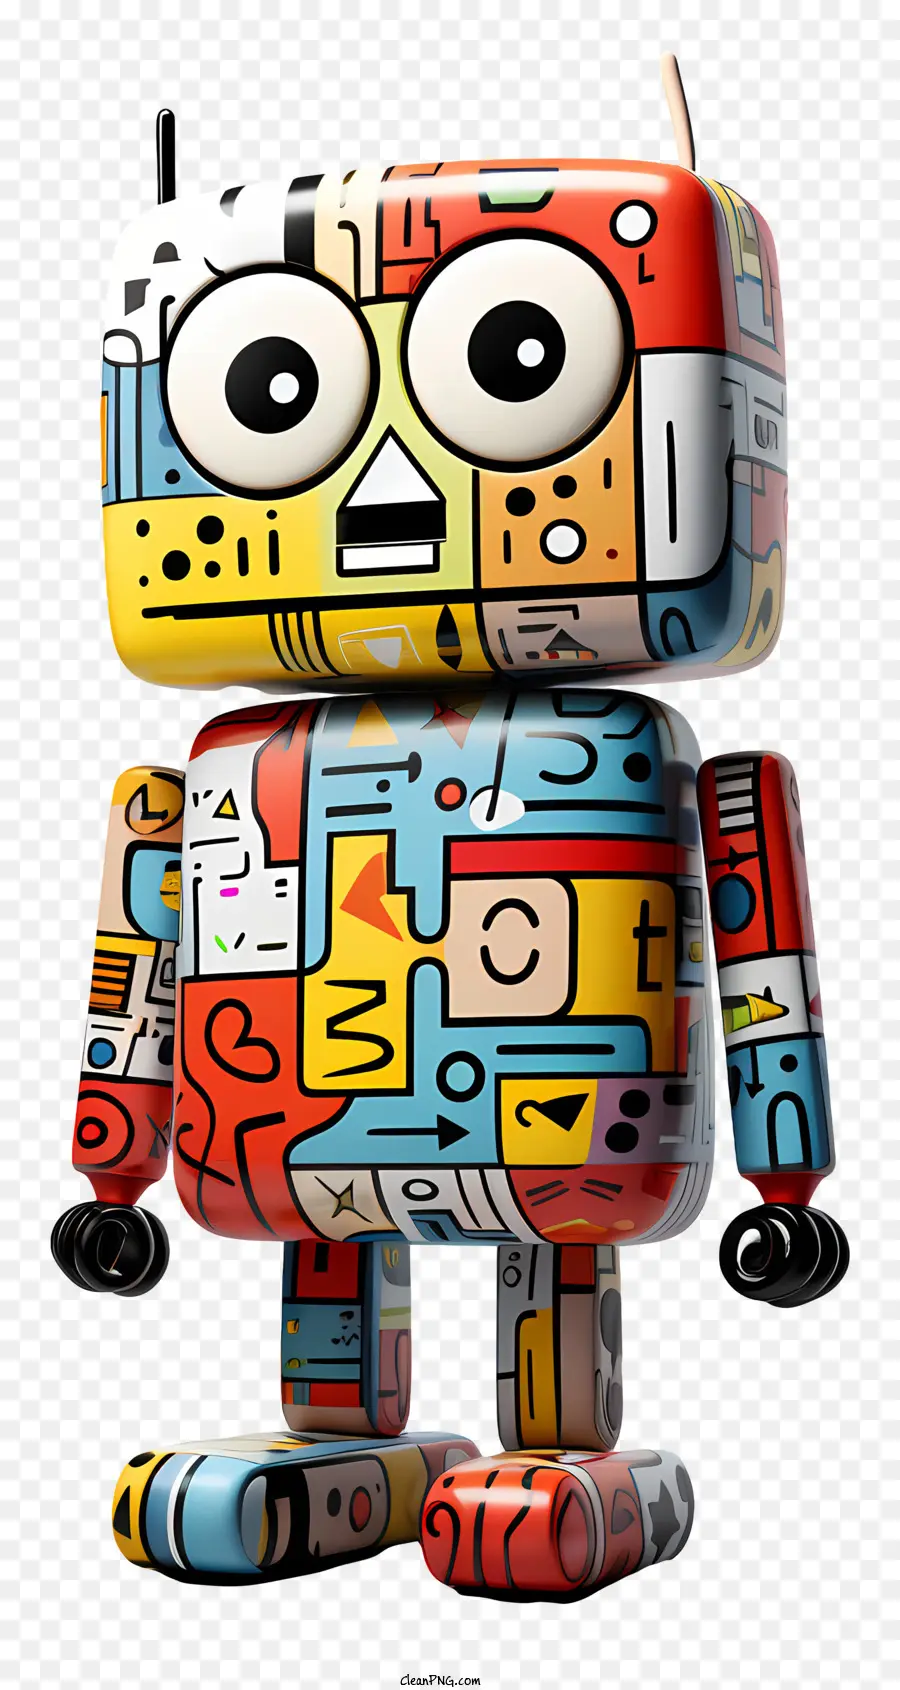 cartoon toy 3d rendering robot cartoon character friendly expression colorful abstract design